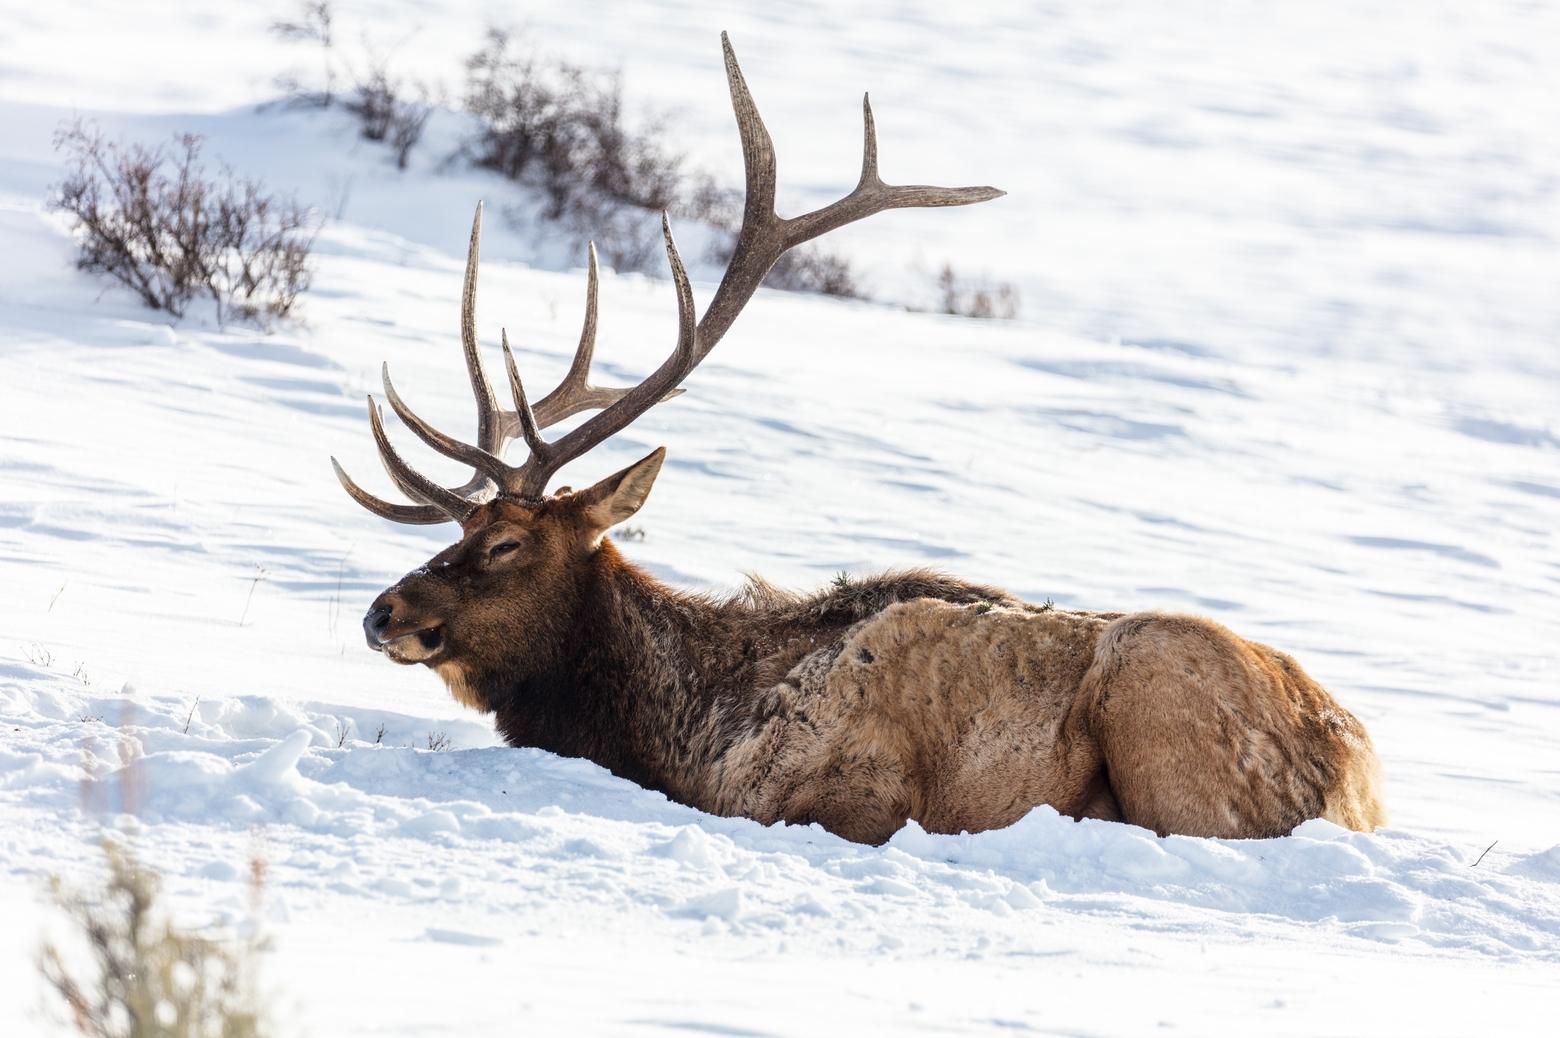 Animals that make it through winter are left extremely fatigued and malnourished in spring months like April and into early May. The number of winterkilled animals is already significant in the Northern Rockies and the toll is expected to markedly rise. Here a haggard-looking bull elk in Yellowstone takes a rest in deep snow. Photo courtesy Jacob W. Frank/NPS